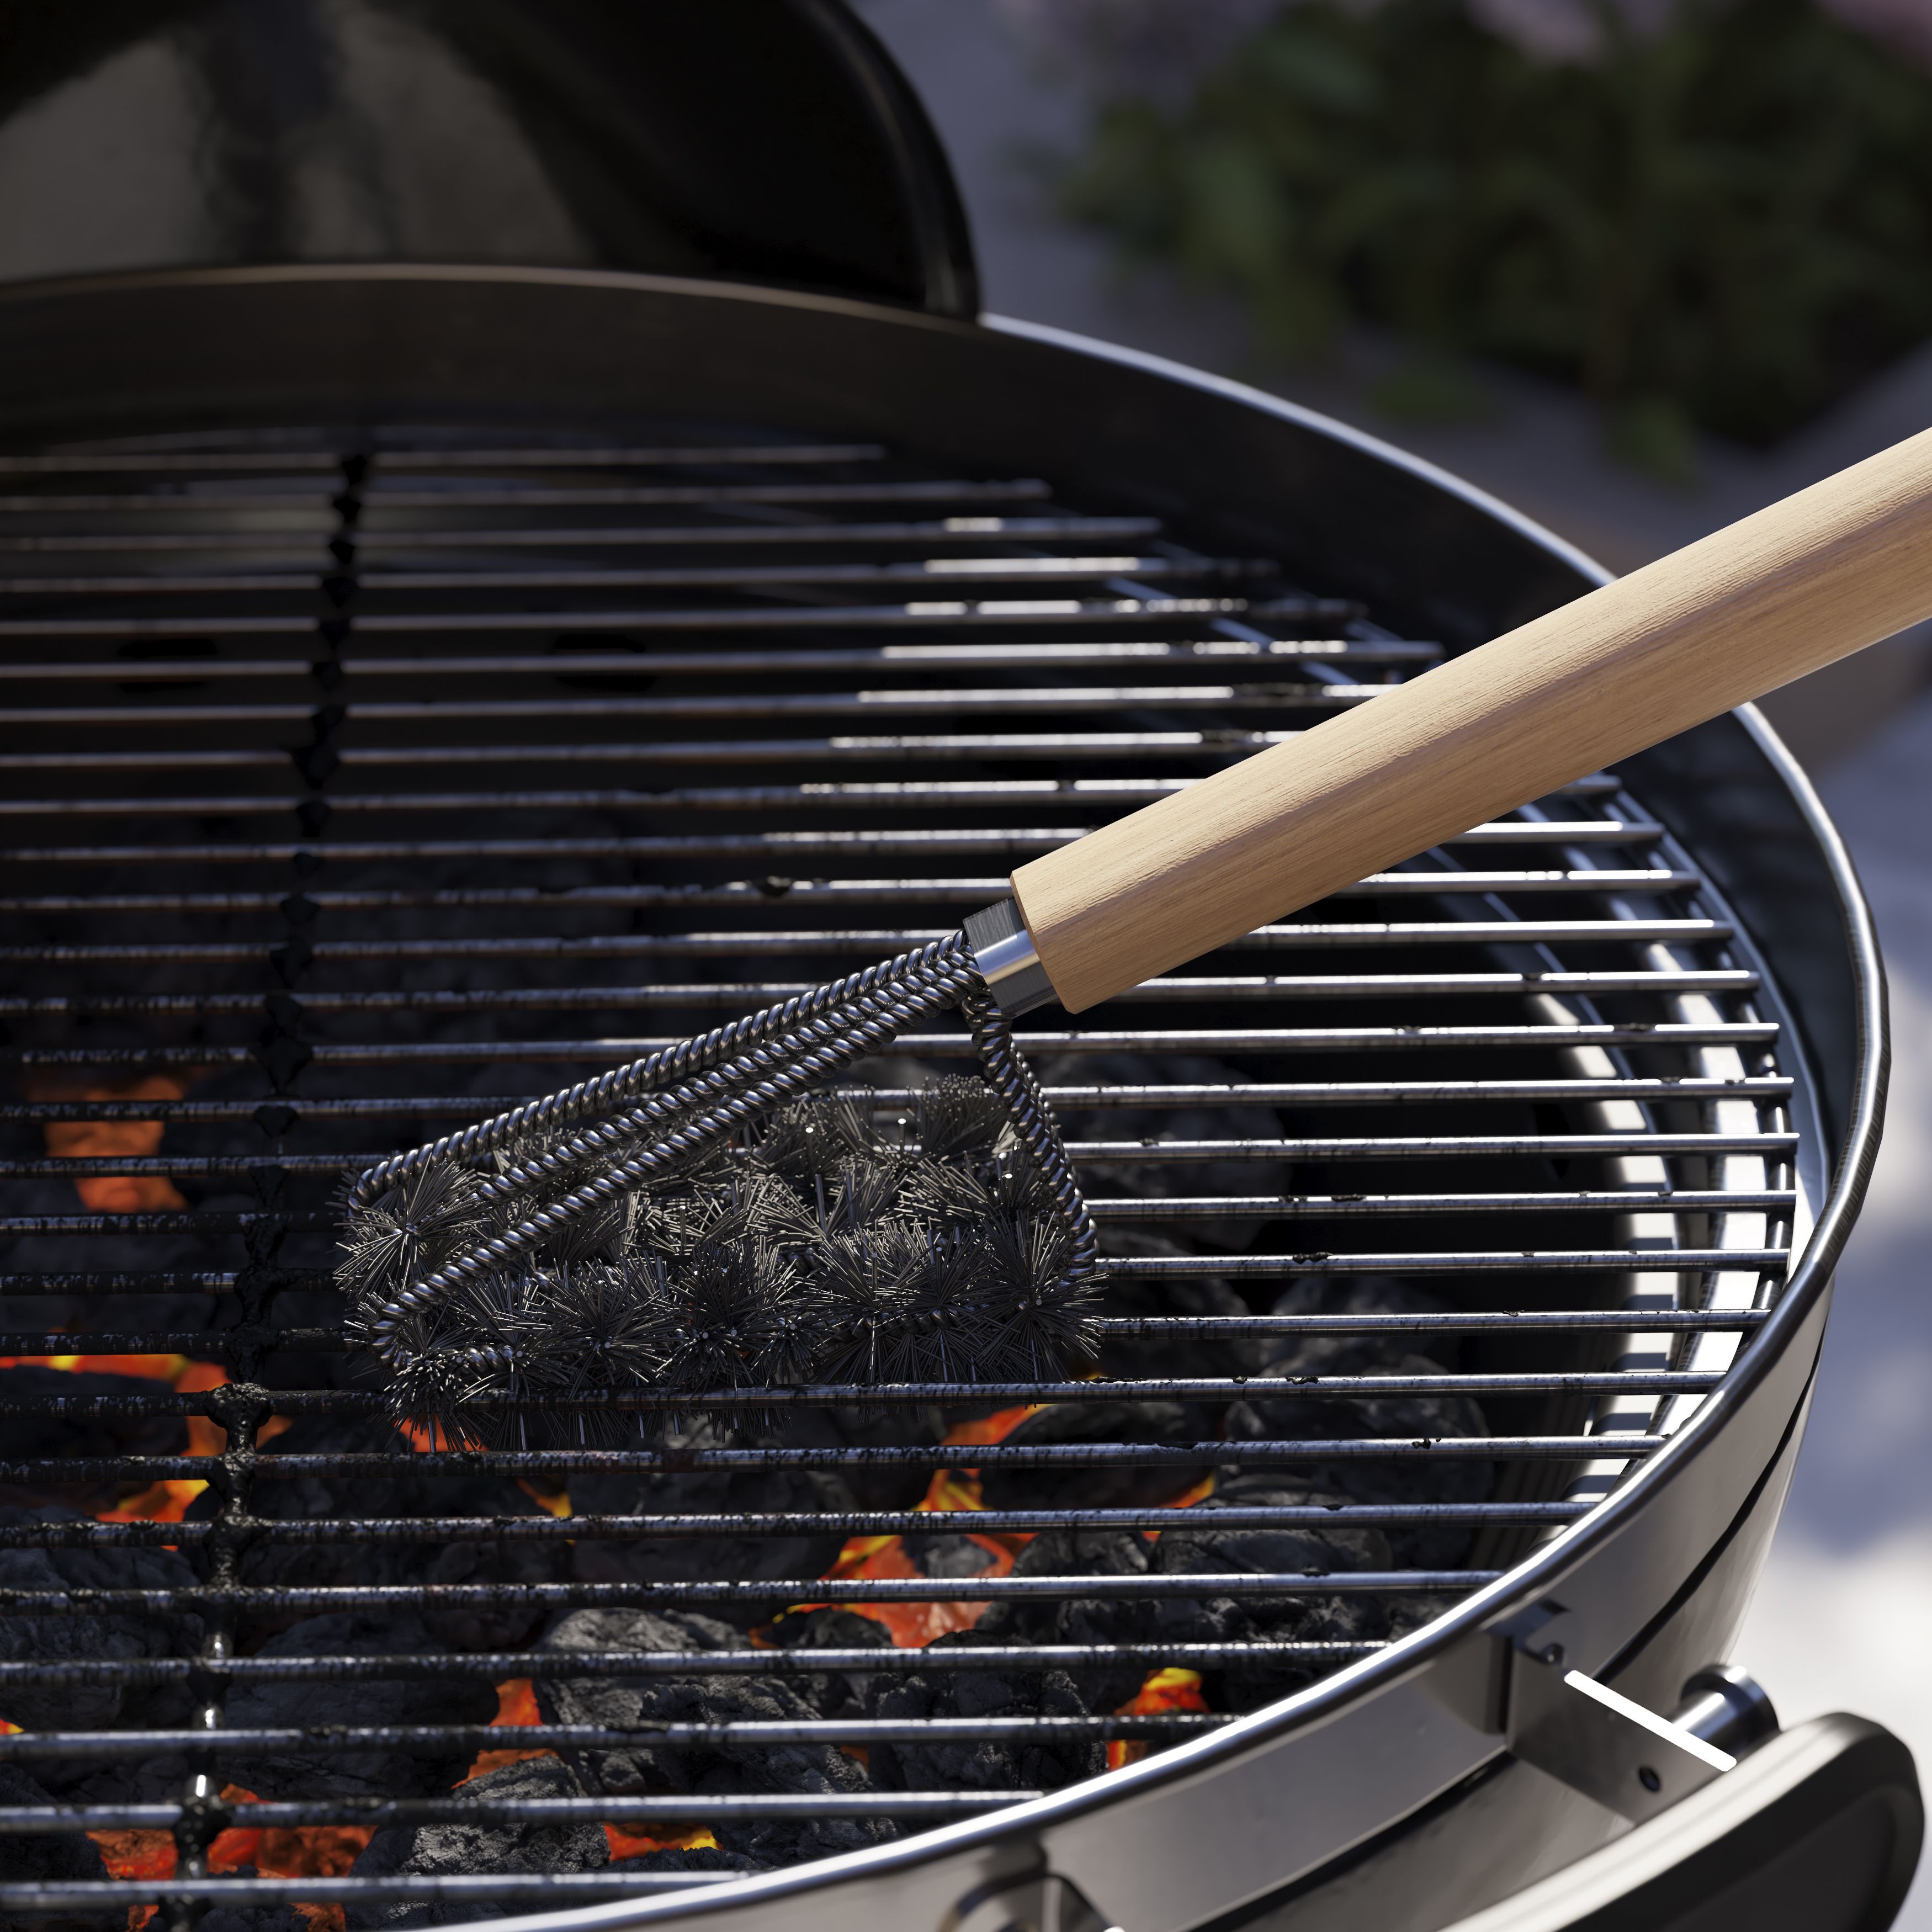 Natural Homemade Grill Cleaner